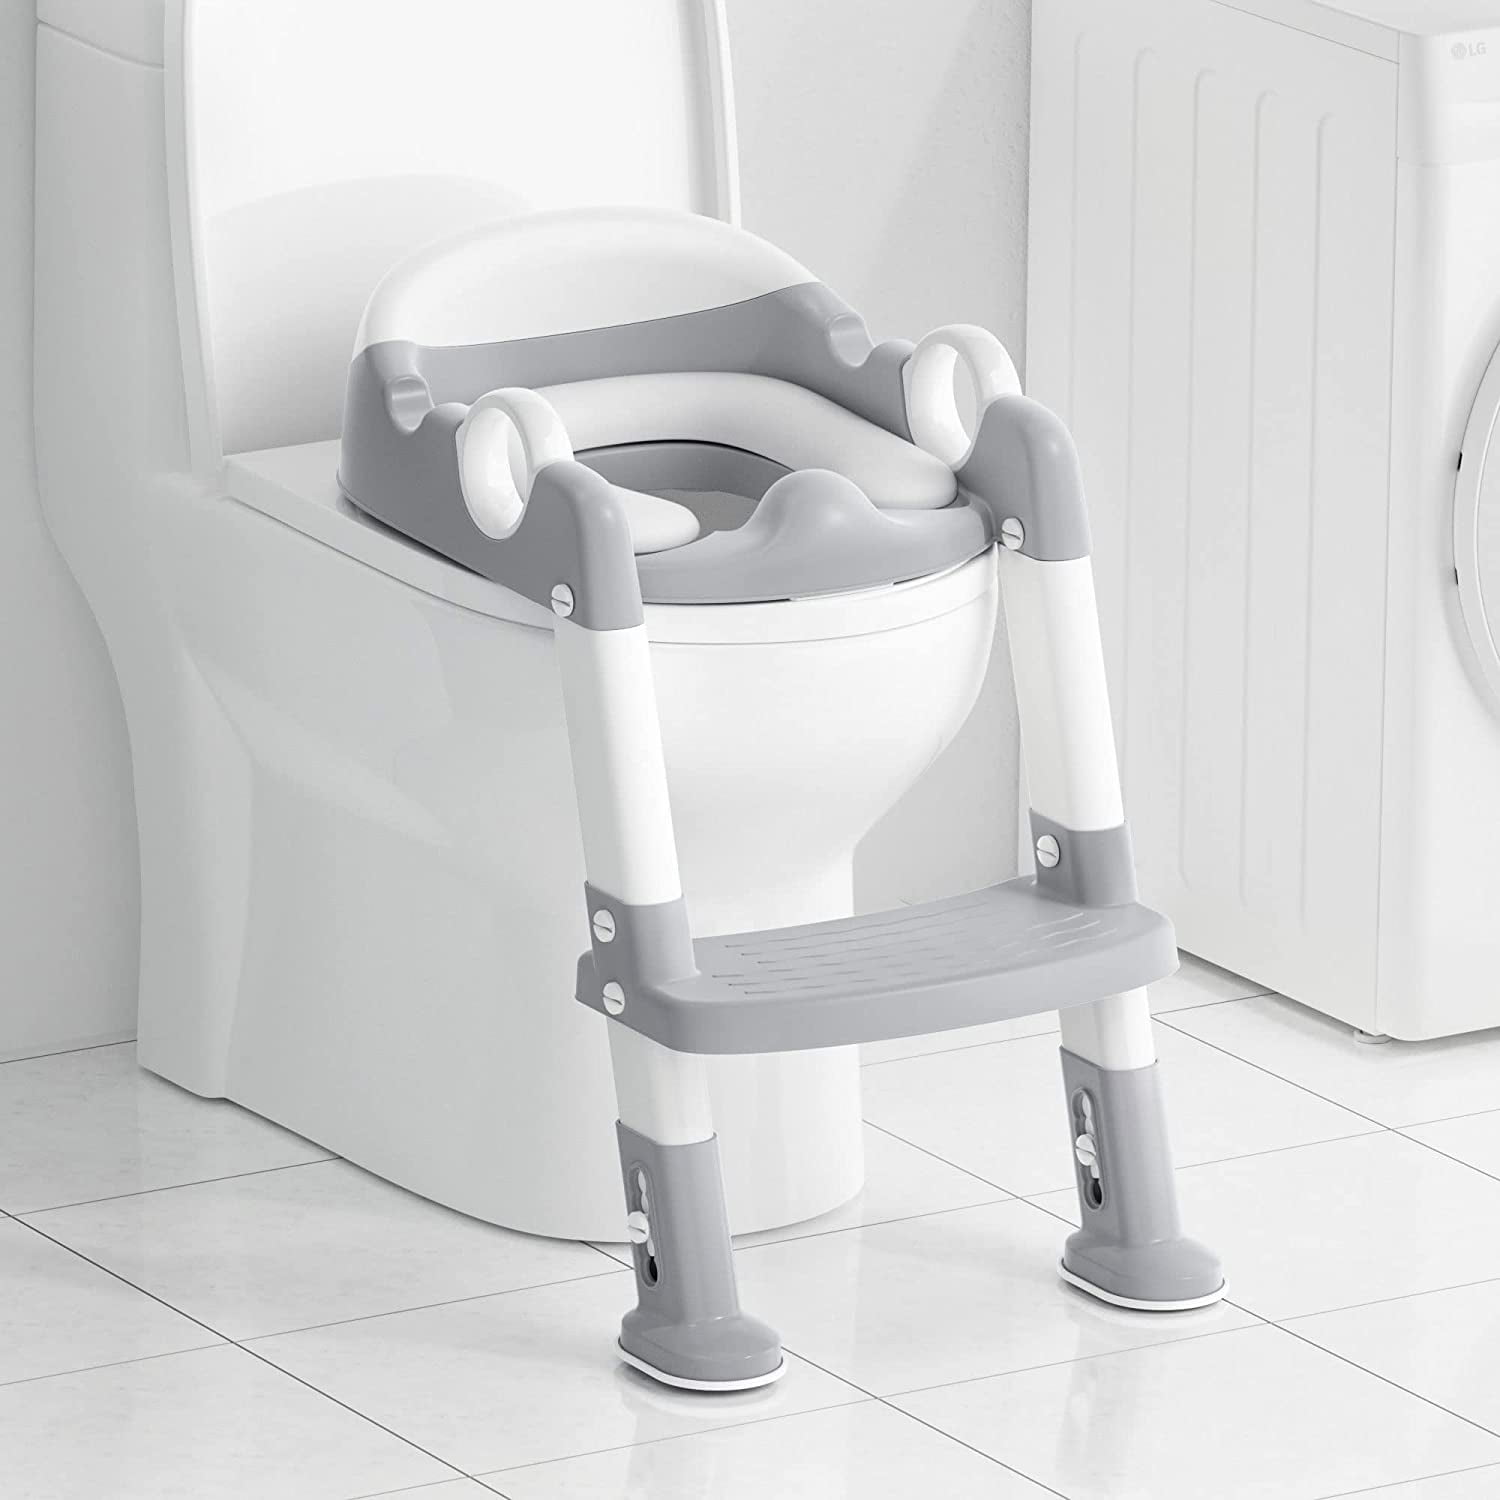 711TEK Toddler's Potty Training Seat with Step Stool India